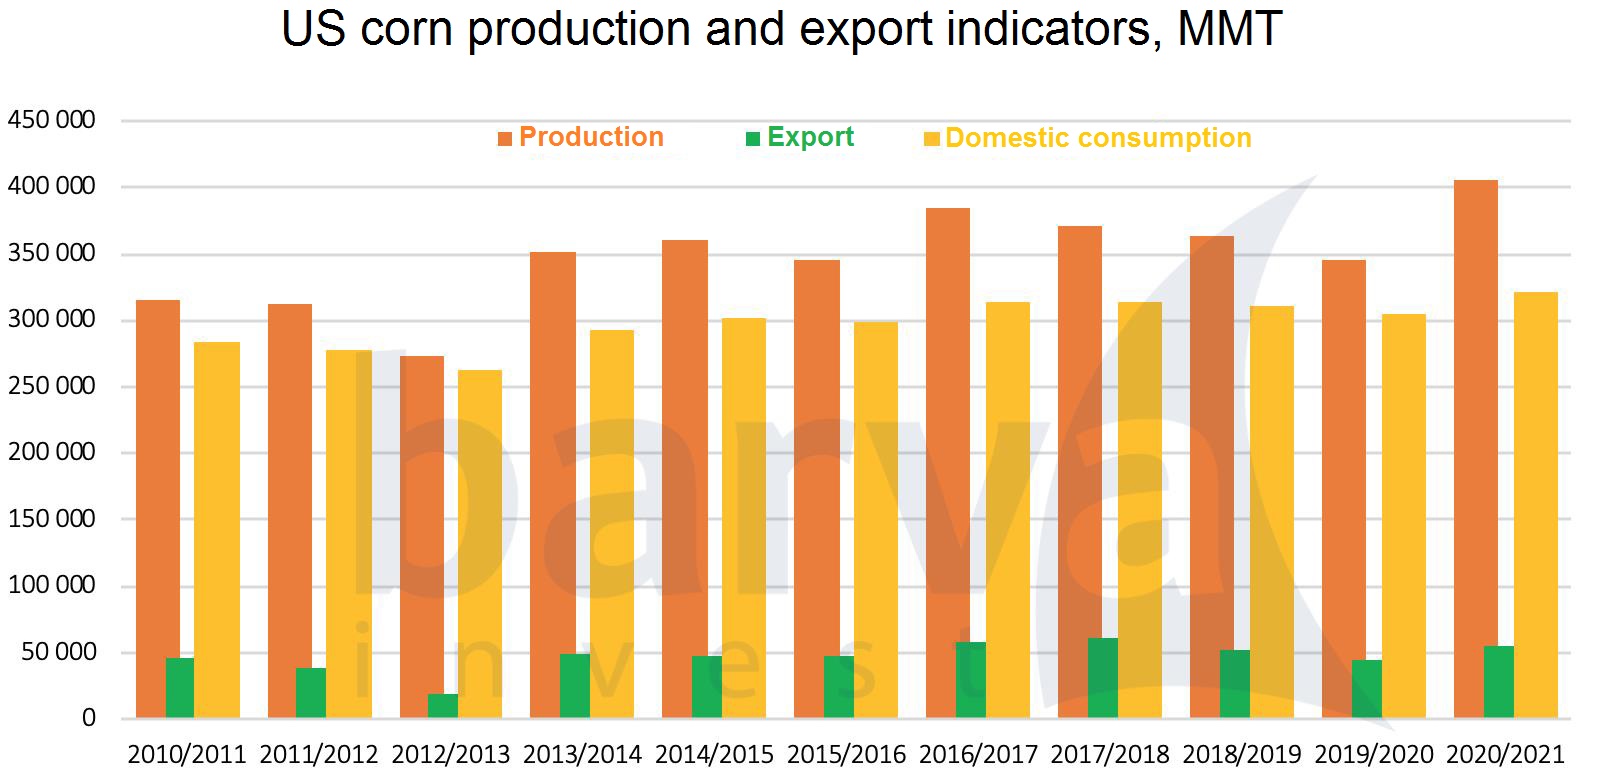 US corn production, export and consumption